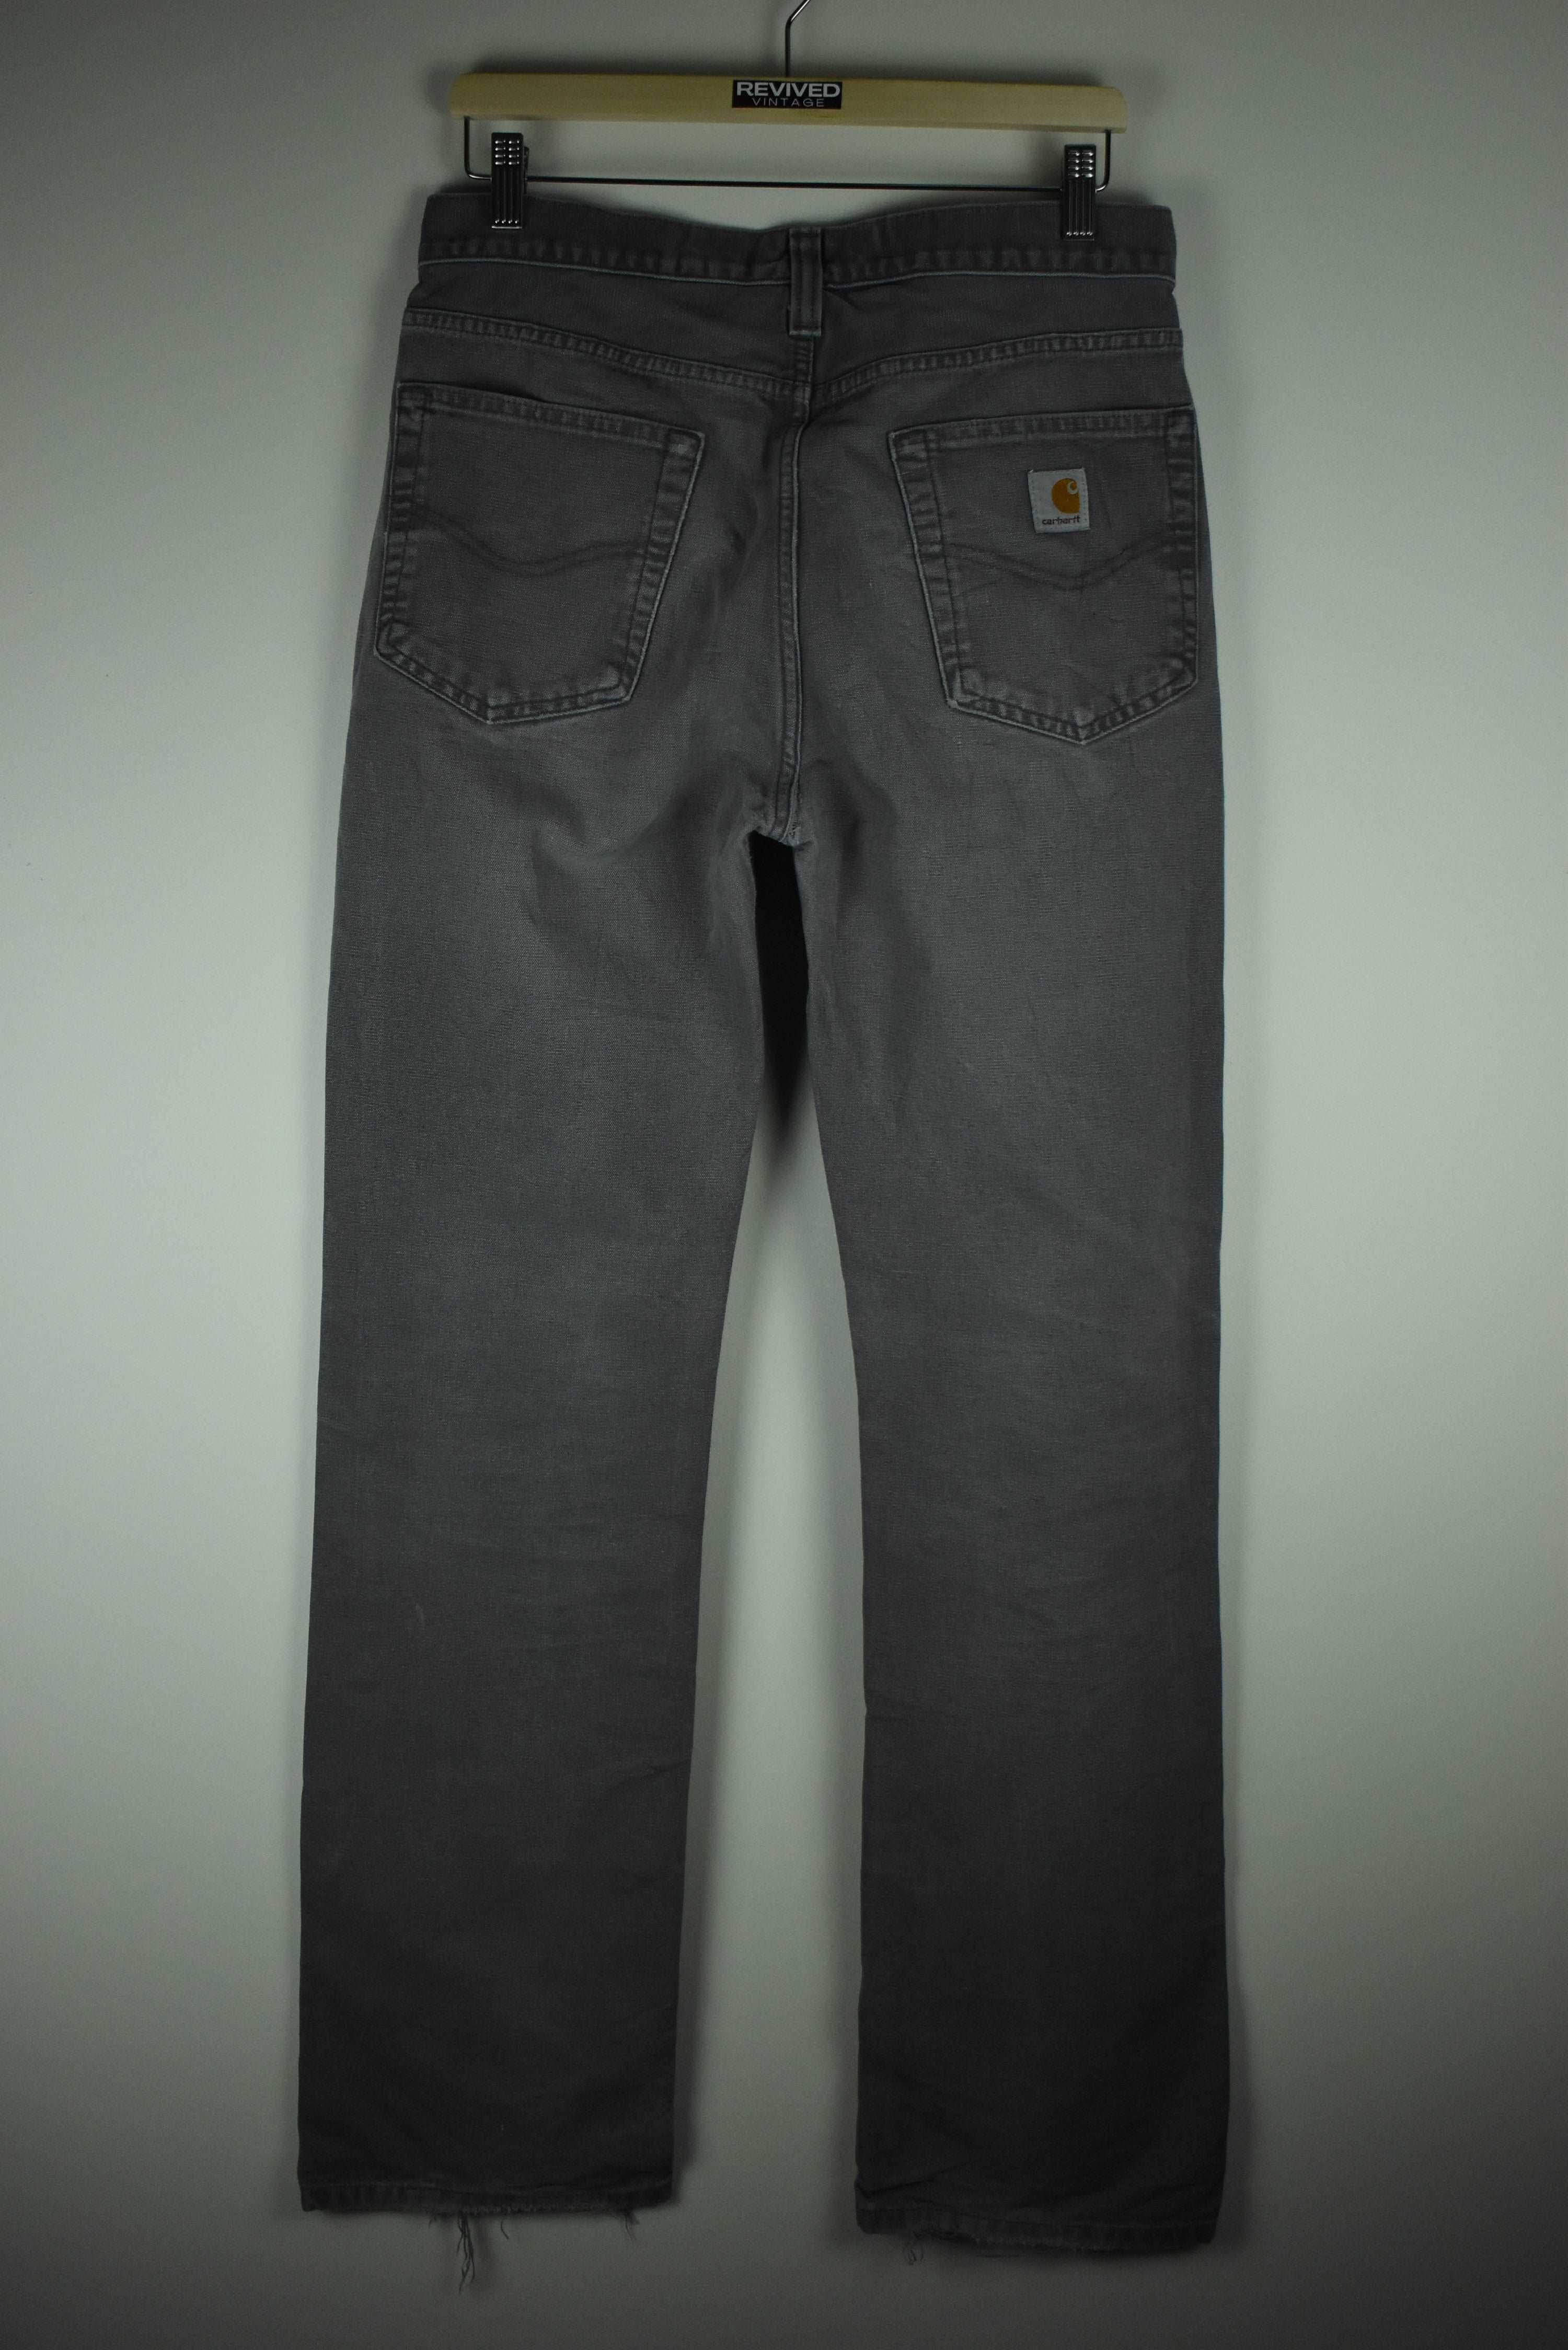 Vintage Carhartt Classic Pants Relaxed Fit 31 x 34